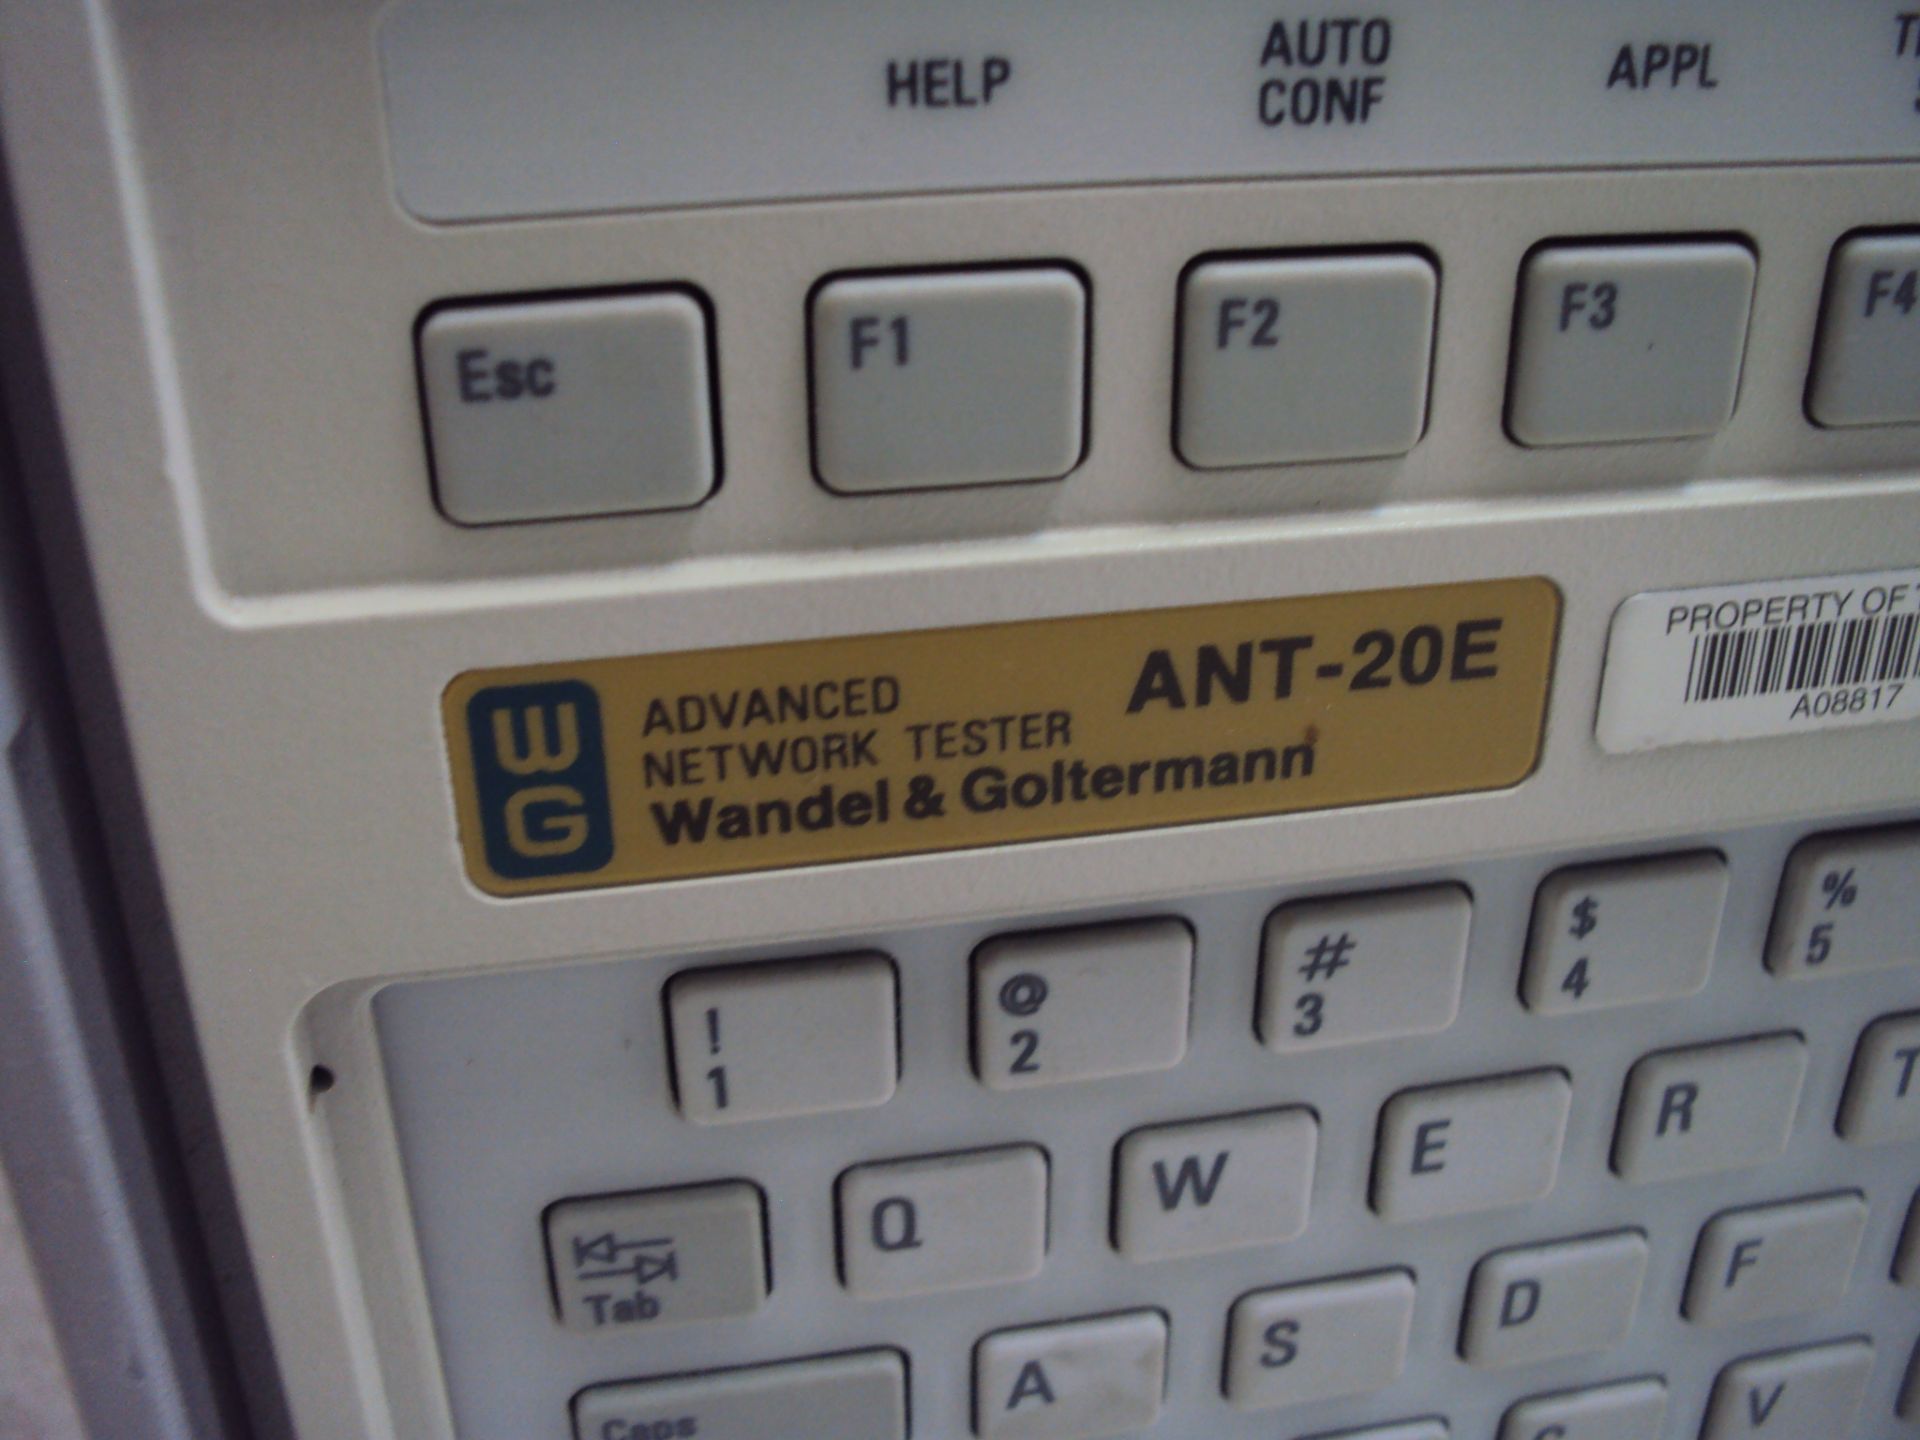 Wandel & Golterman ANT-20E Advanced Network Tester - Image 4 of 4